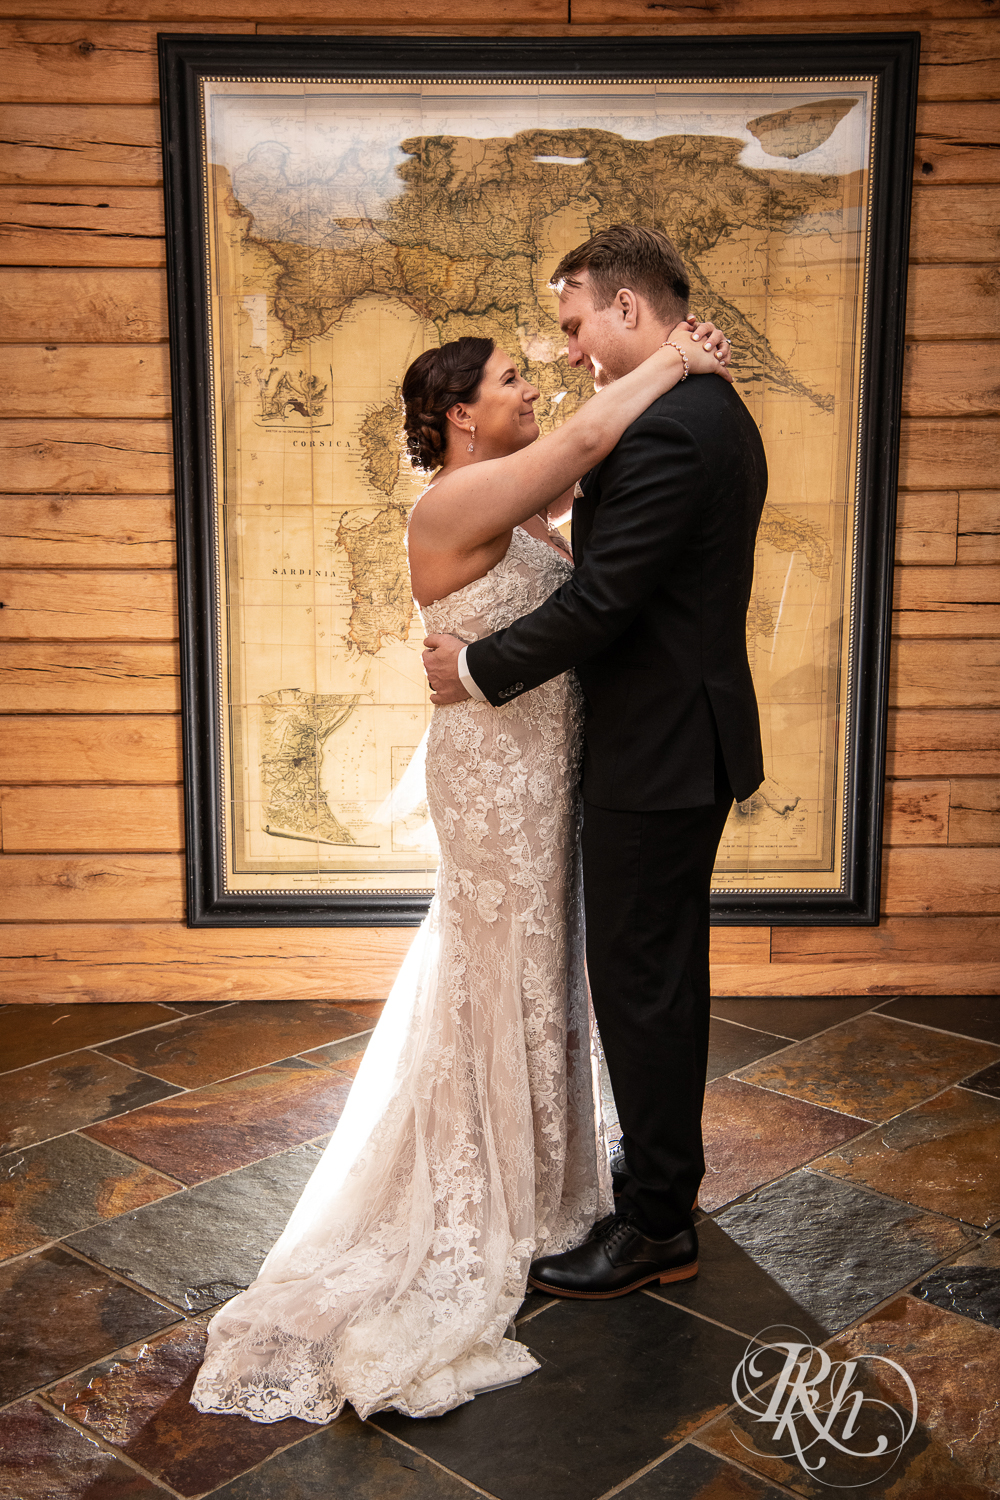 Bride and groom share first dance at wedding in cabin in Stillwater, Minnesota.